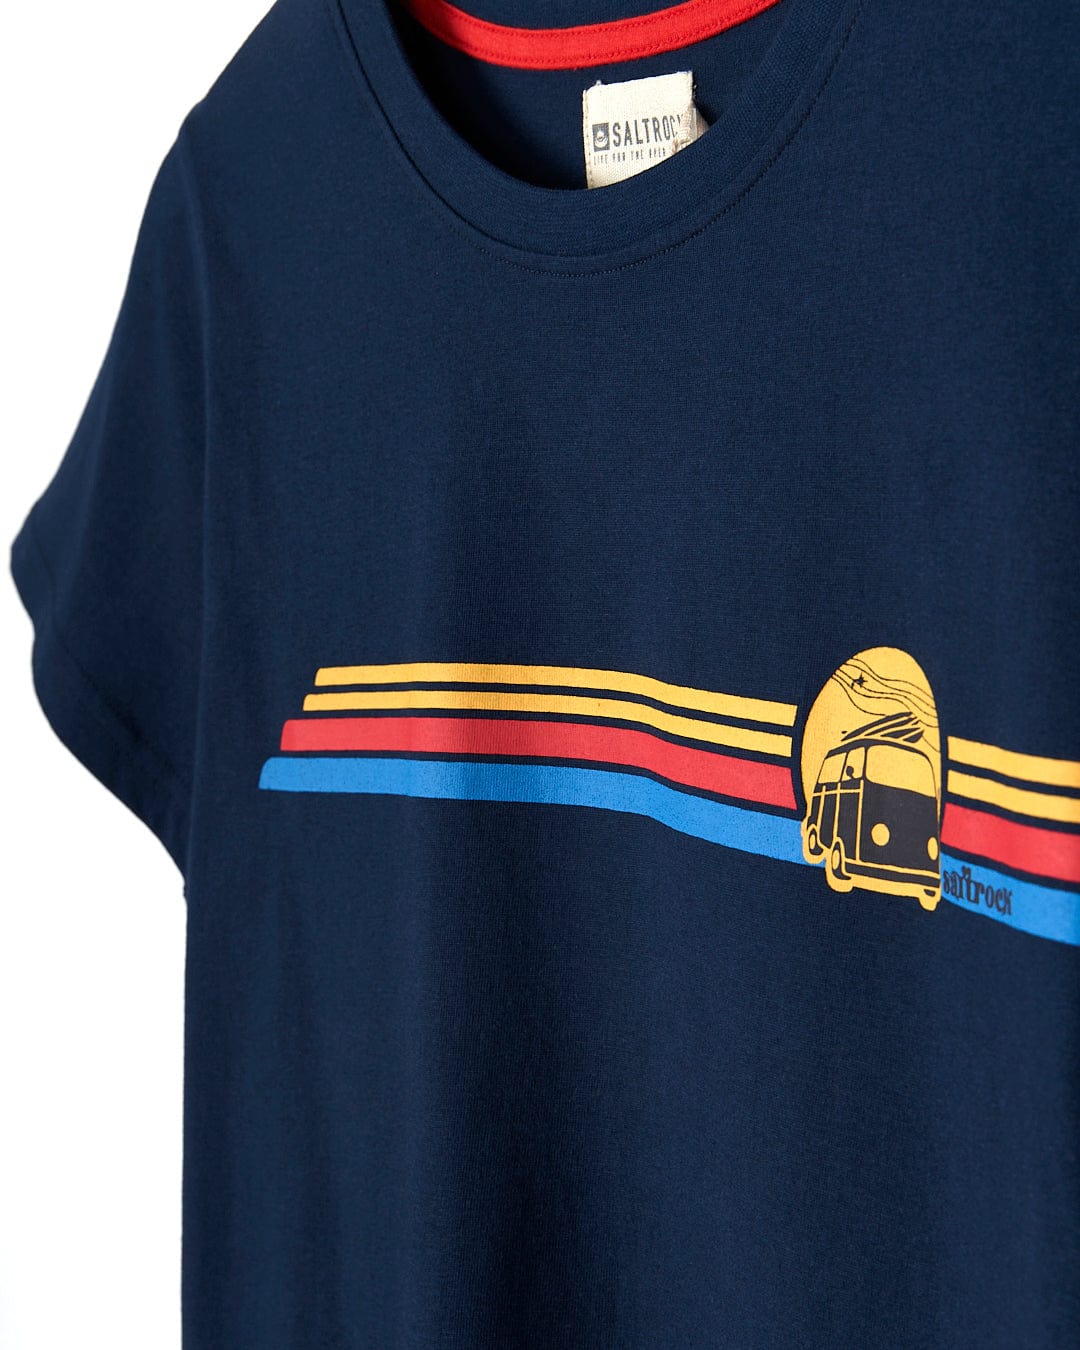 A Saltrock Celeste Stripe - Womens Short Sleeve T-Shirt - Blue with a red, yellow and blue stripe.